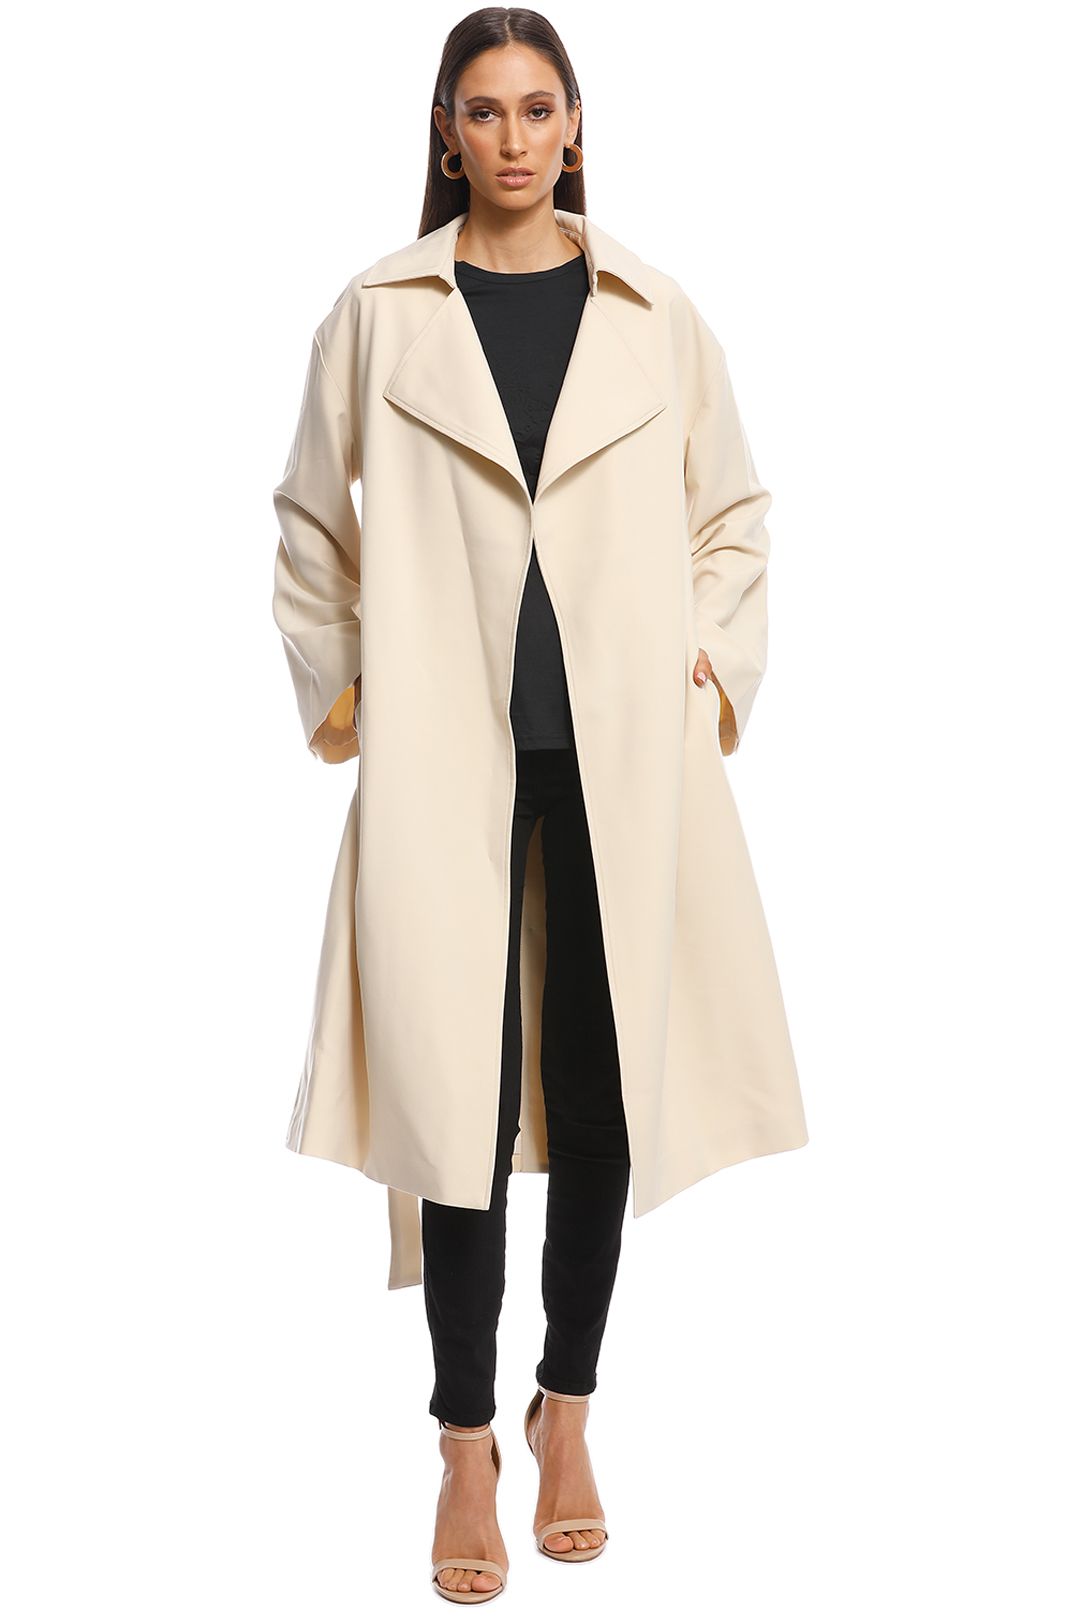 Friend of Audrey - Emerson Oversized Trench Coat - Sand - Front B